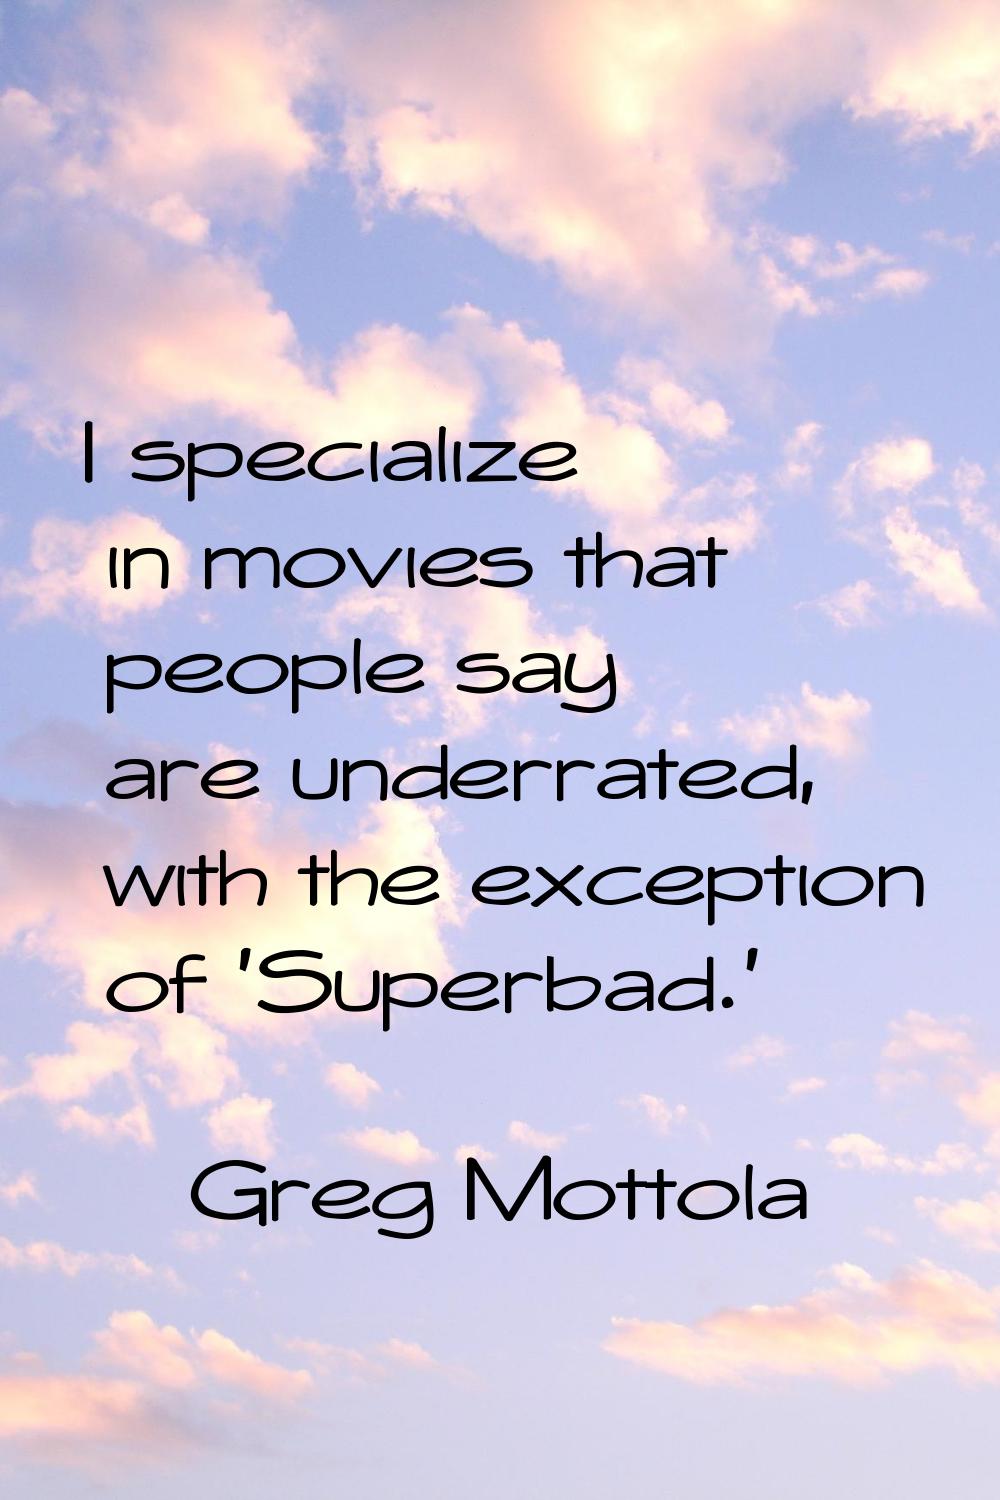 I specialize in movies that people say are underrated, with the exception of 'Superbad.'